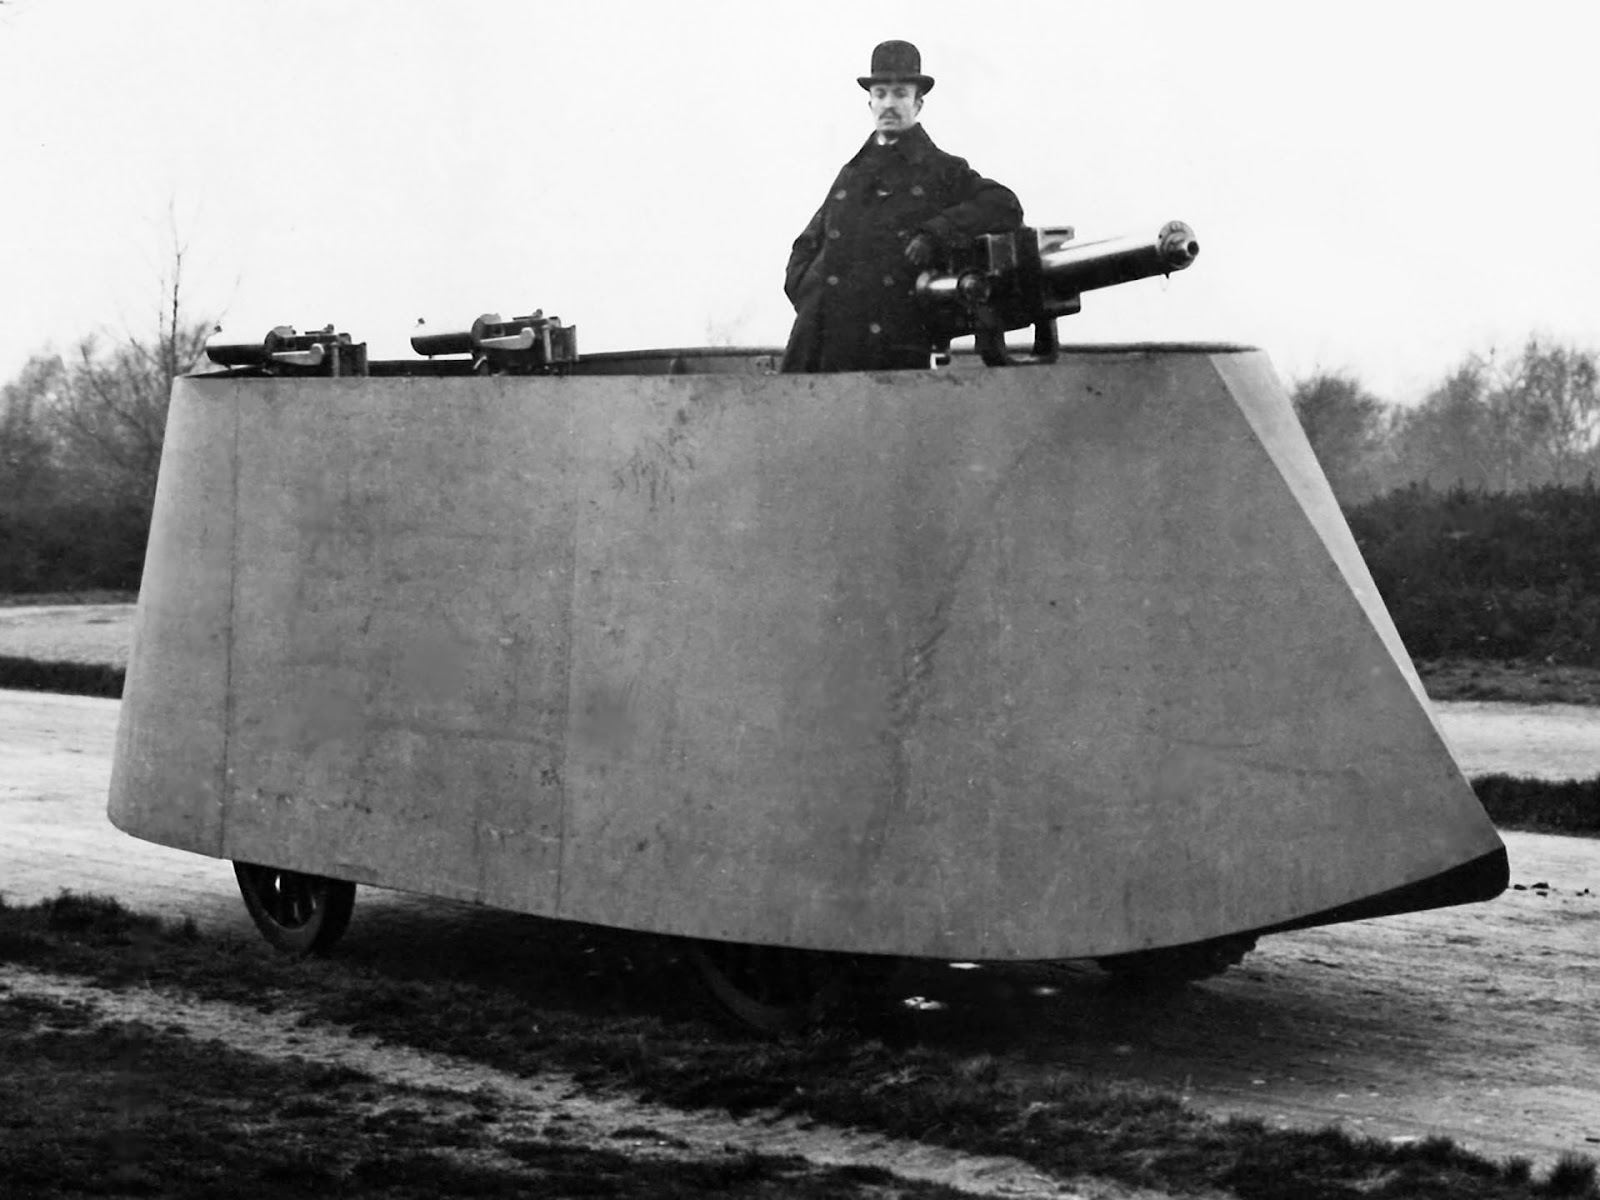 Britain's Simms Motor War Car existed only as a prototype. Image via Wikimedia Commons.